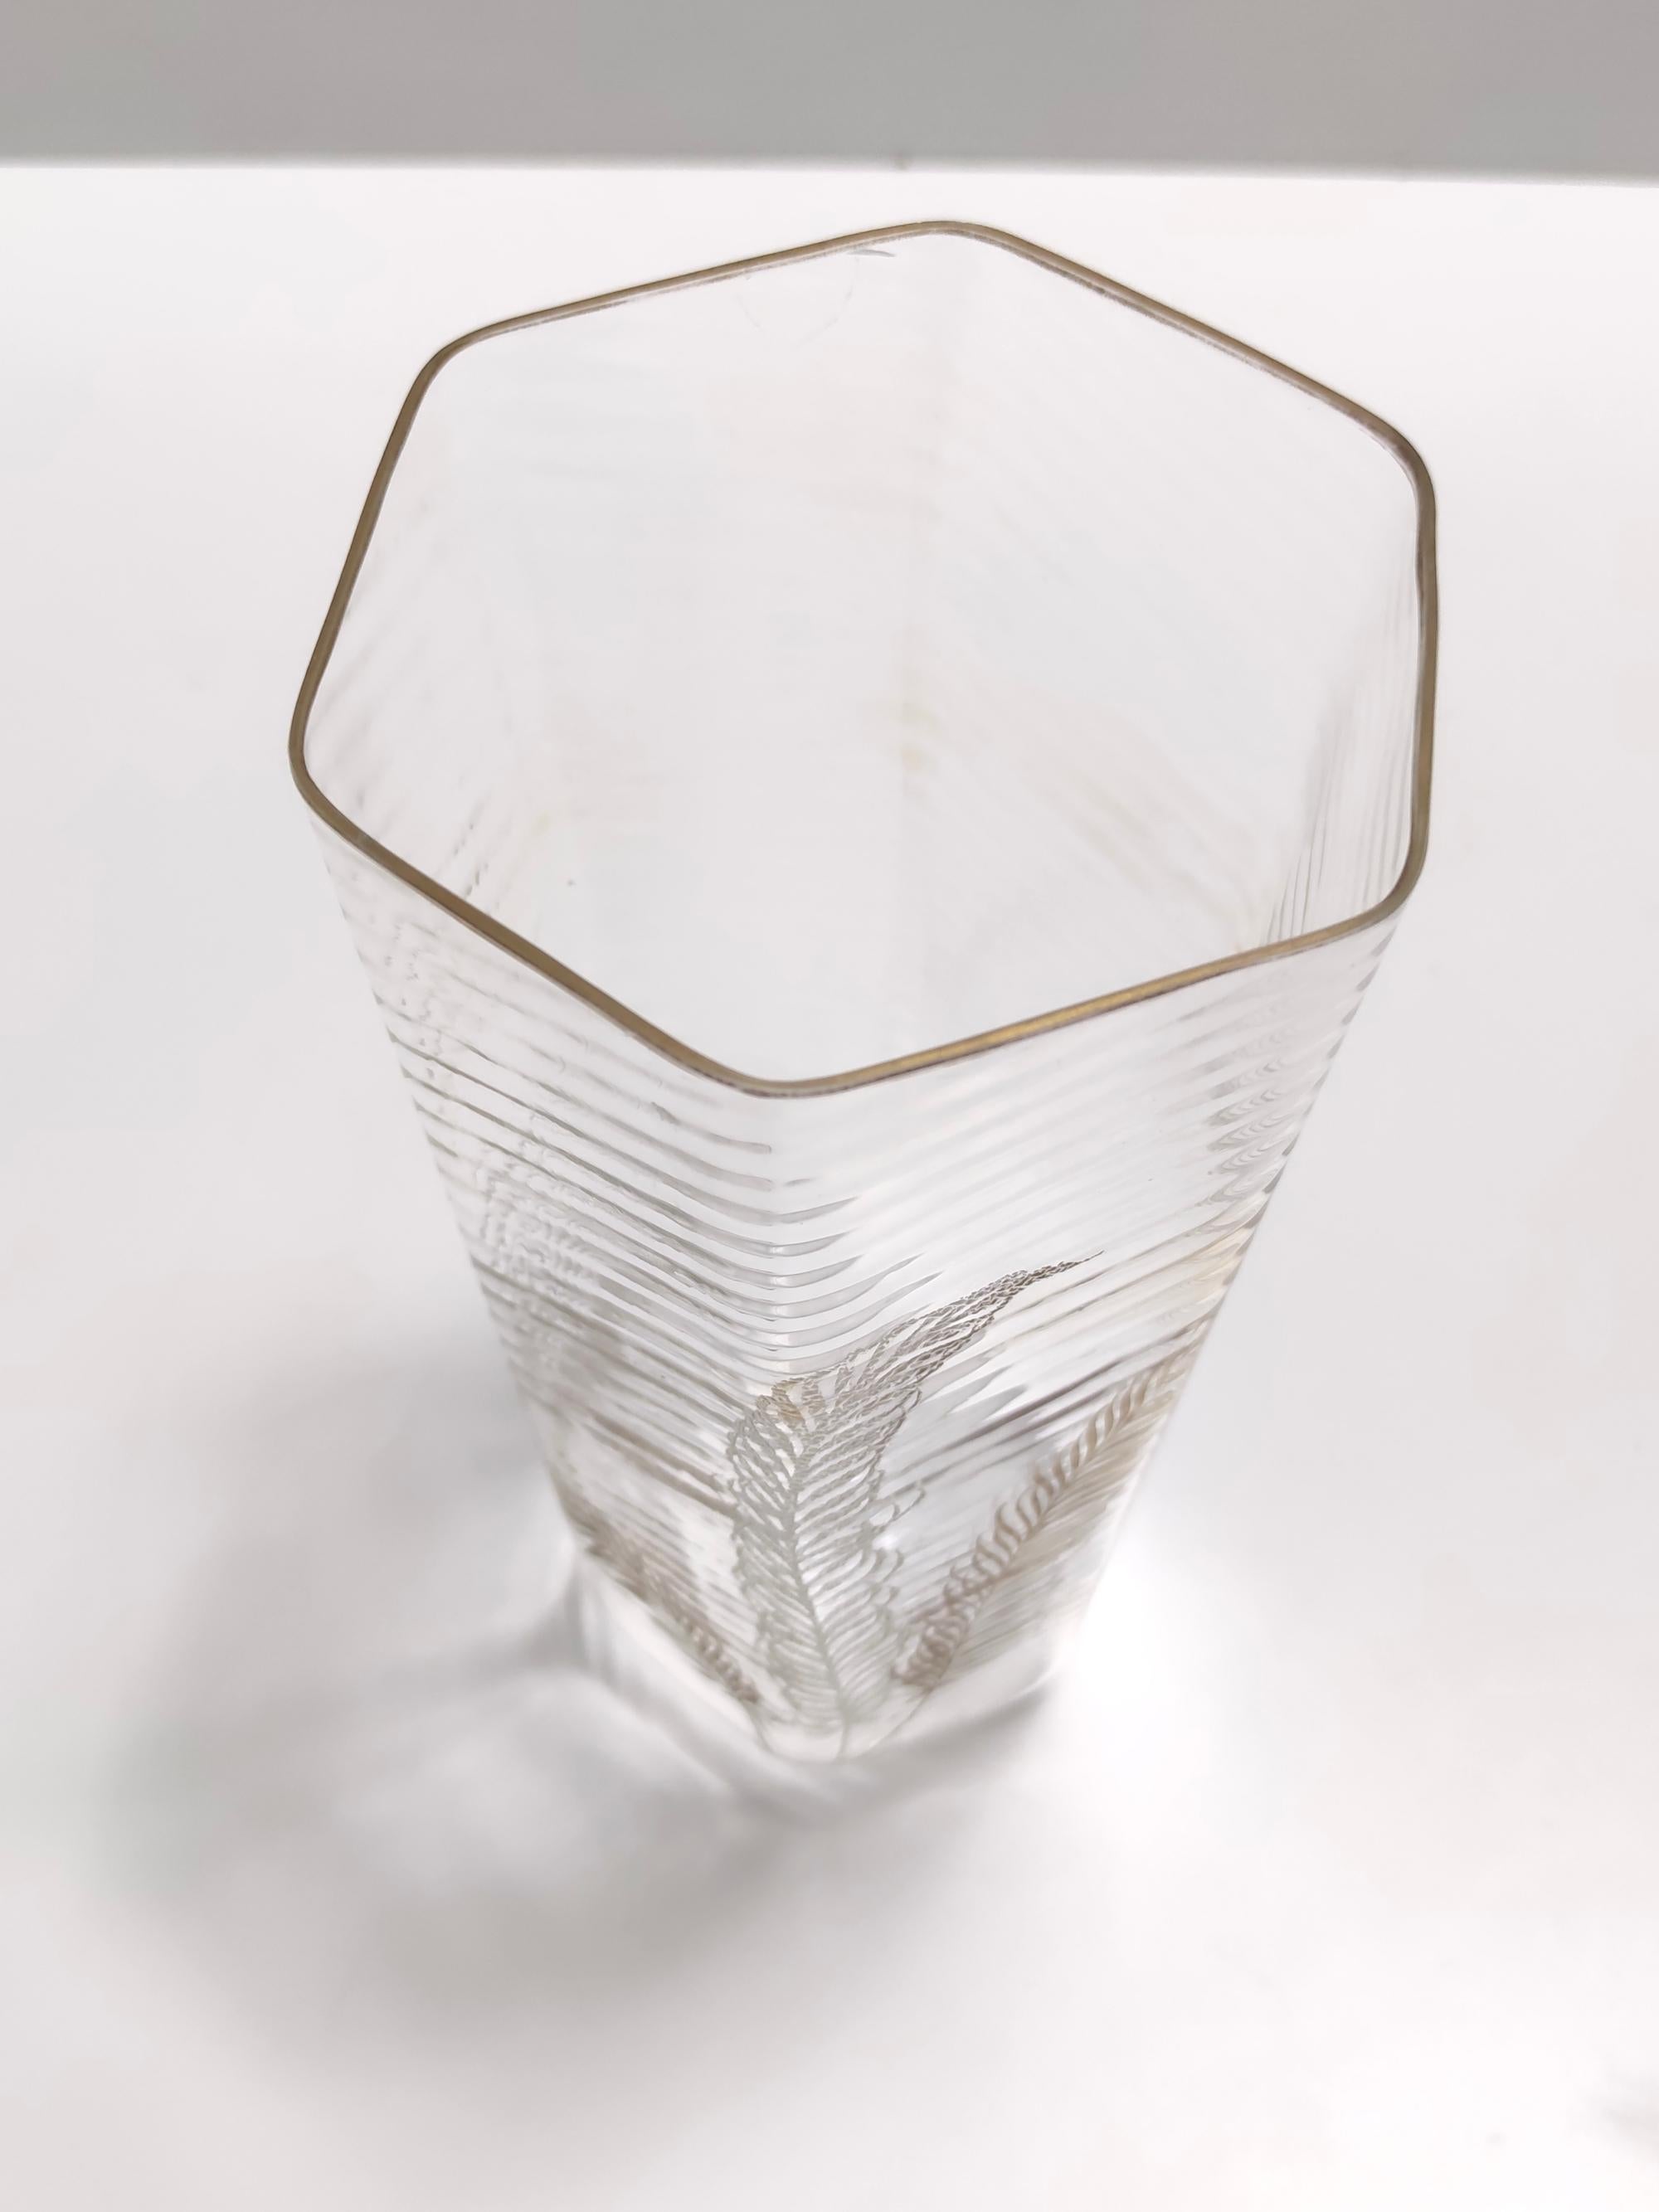 Rare and Elegant Transparent and Gold Hexagonal Murano Glass Vase by Cenedese In Excellent Condition For Sale In Bresso, Lombardy